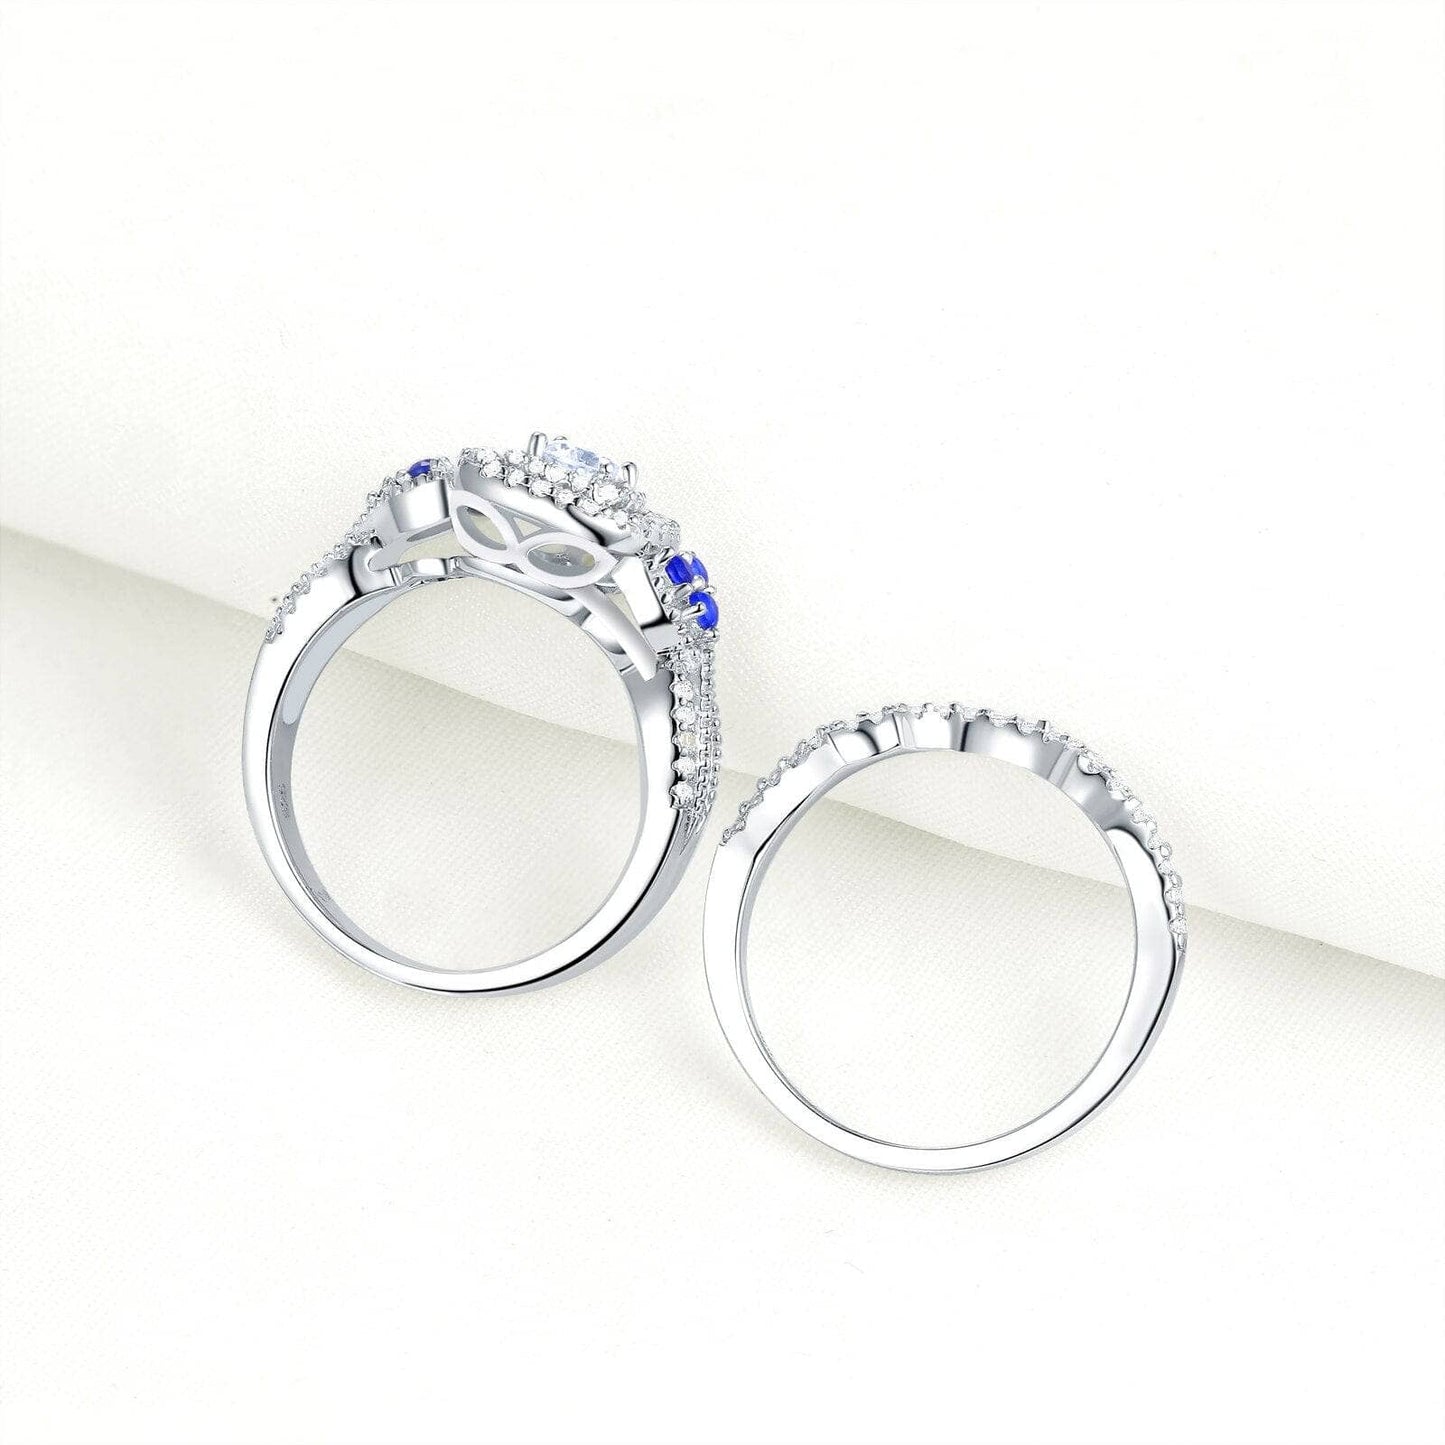 2Pcs 925 Sterling Silver 1.5 Ct White Blue Cubic Zircon Ring